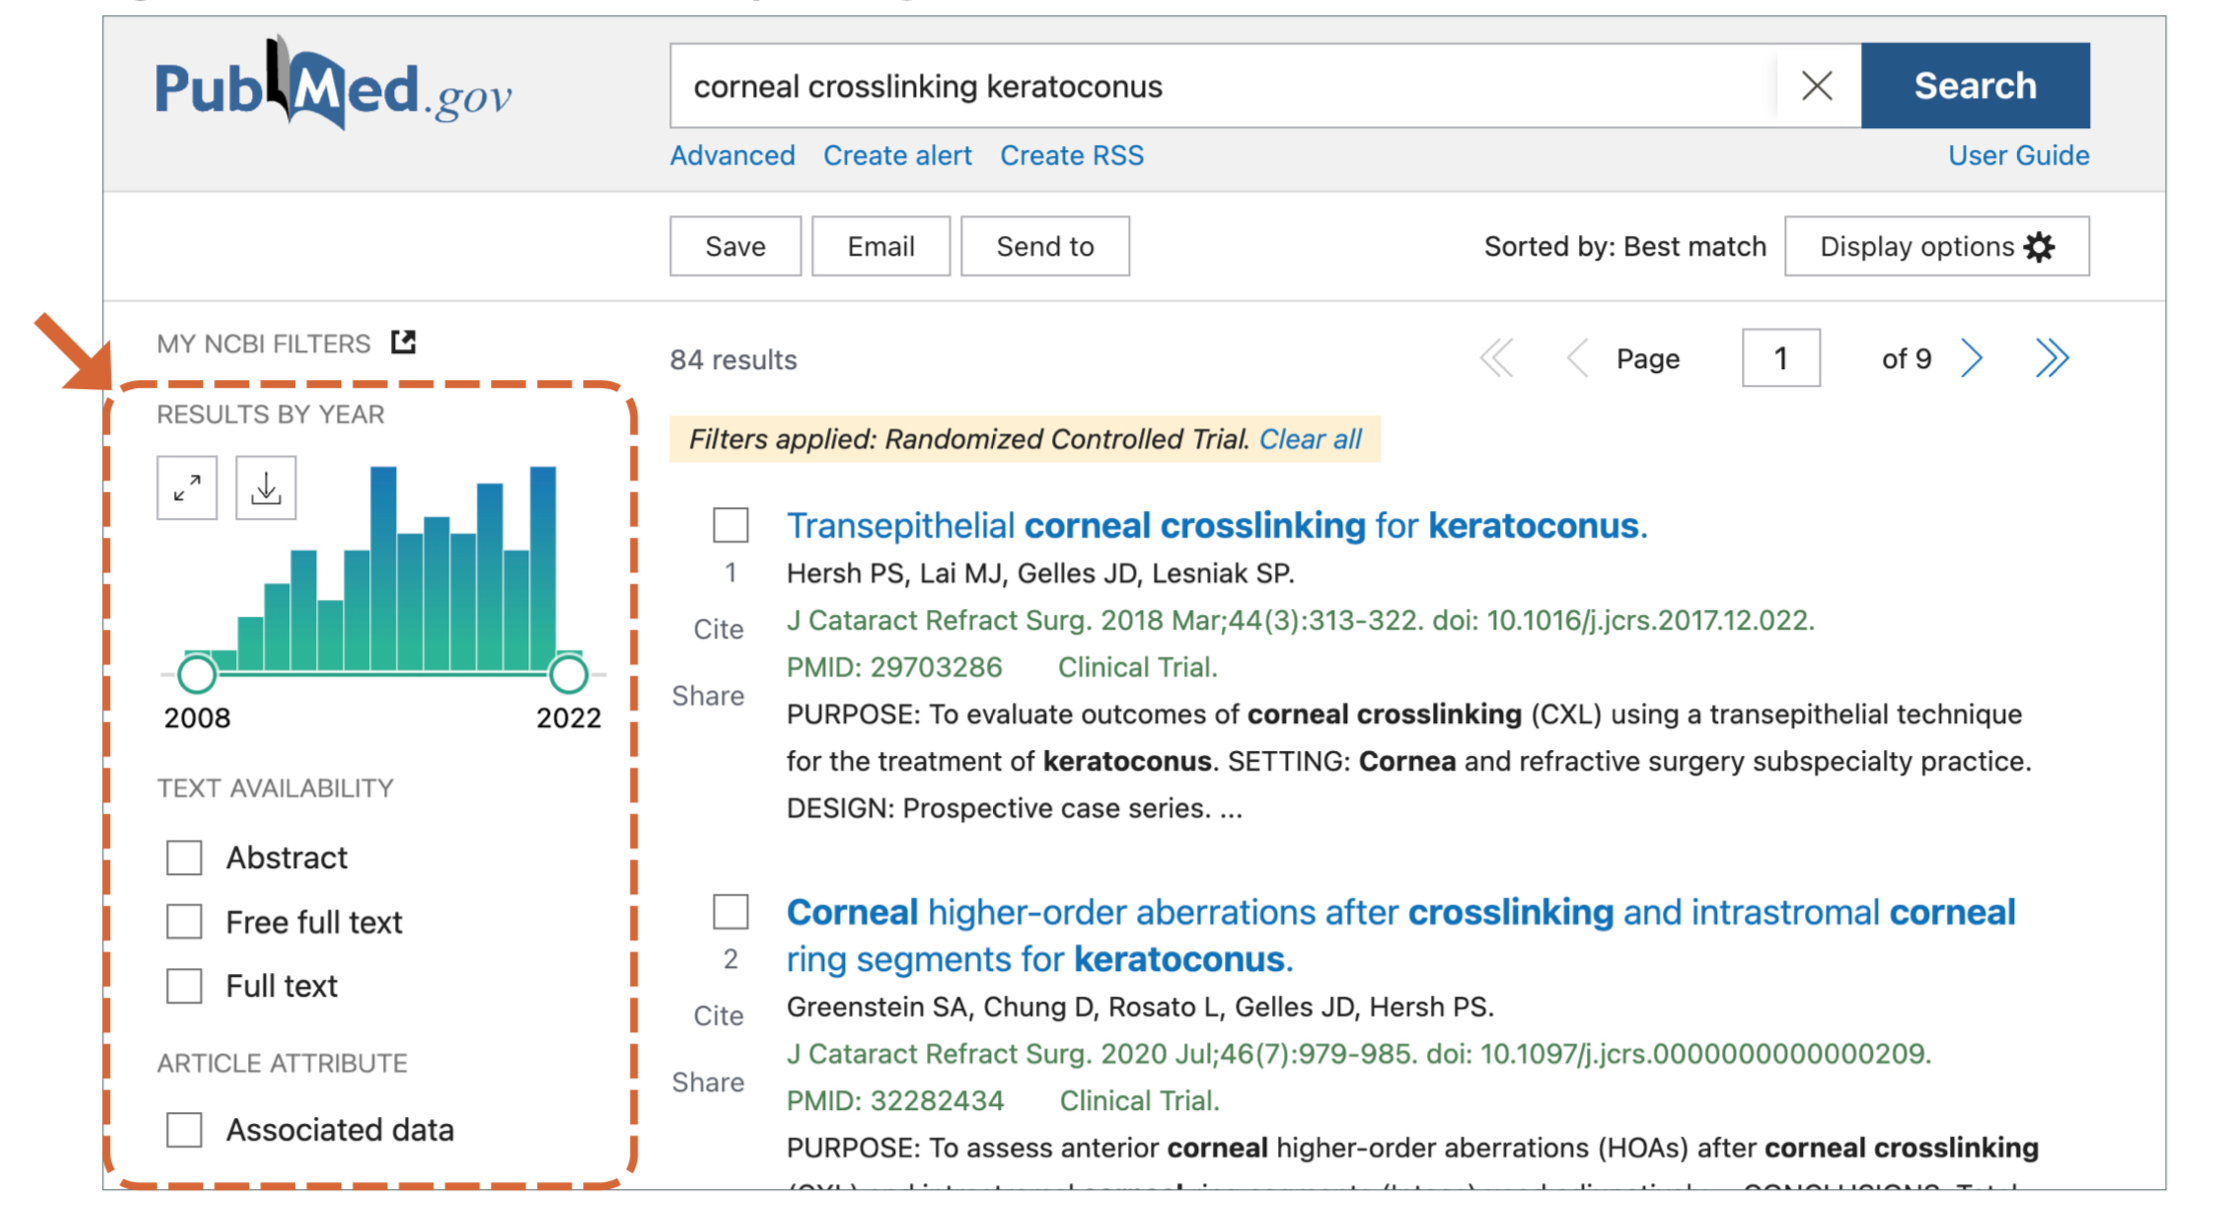 Figure 1: Search results on Pubmed: www.pubmed.gov